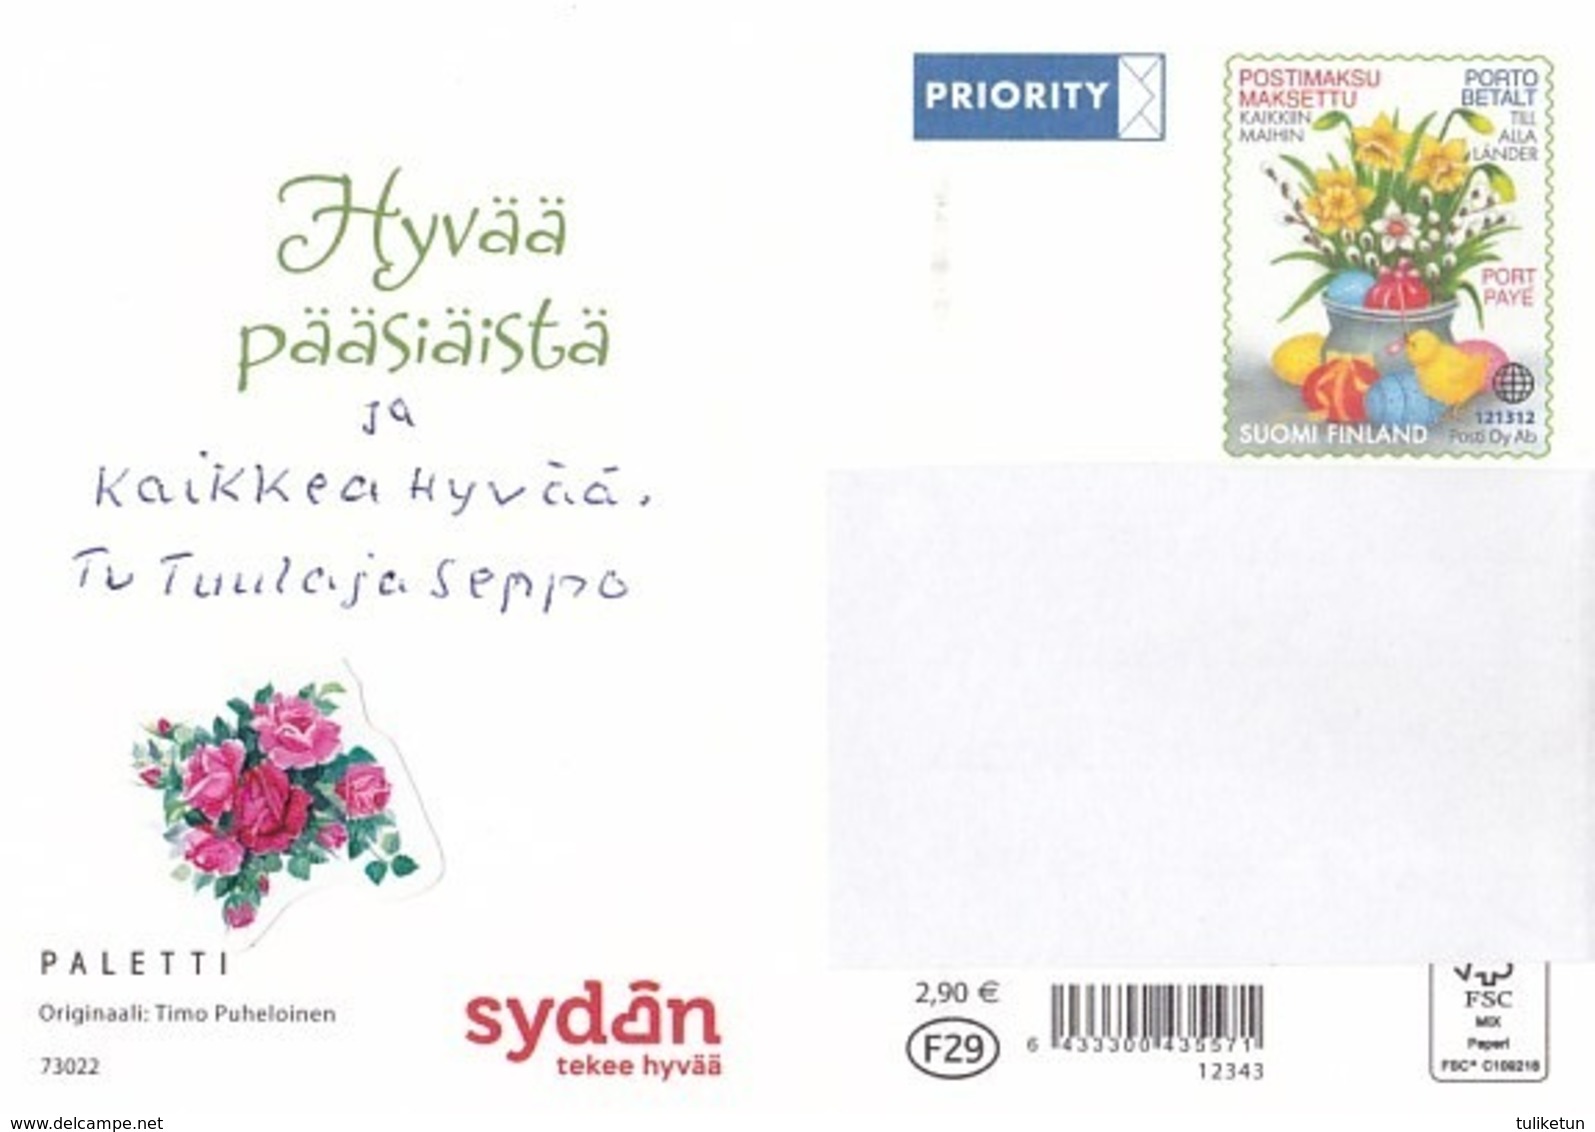 Postal Stationery - Bird - Chick - Easter Flowers - Daffodils - Willows - Heart Society - Suomi Finland - Postage Paid - Postal Stationery